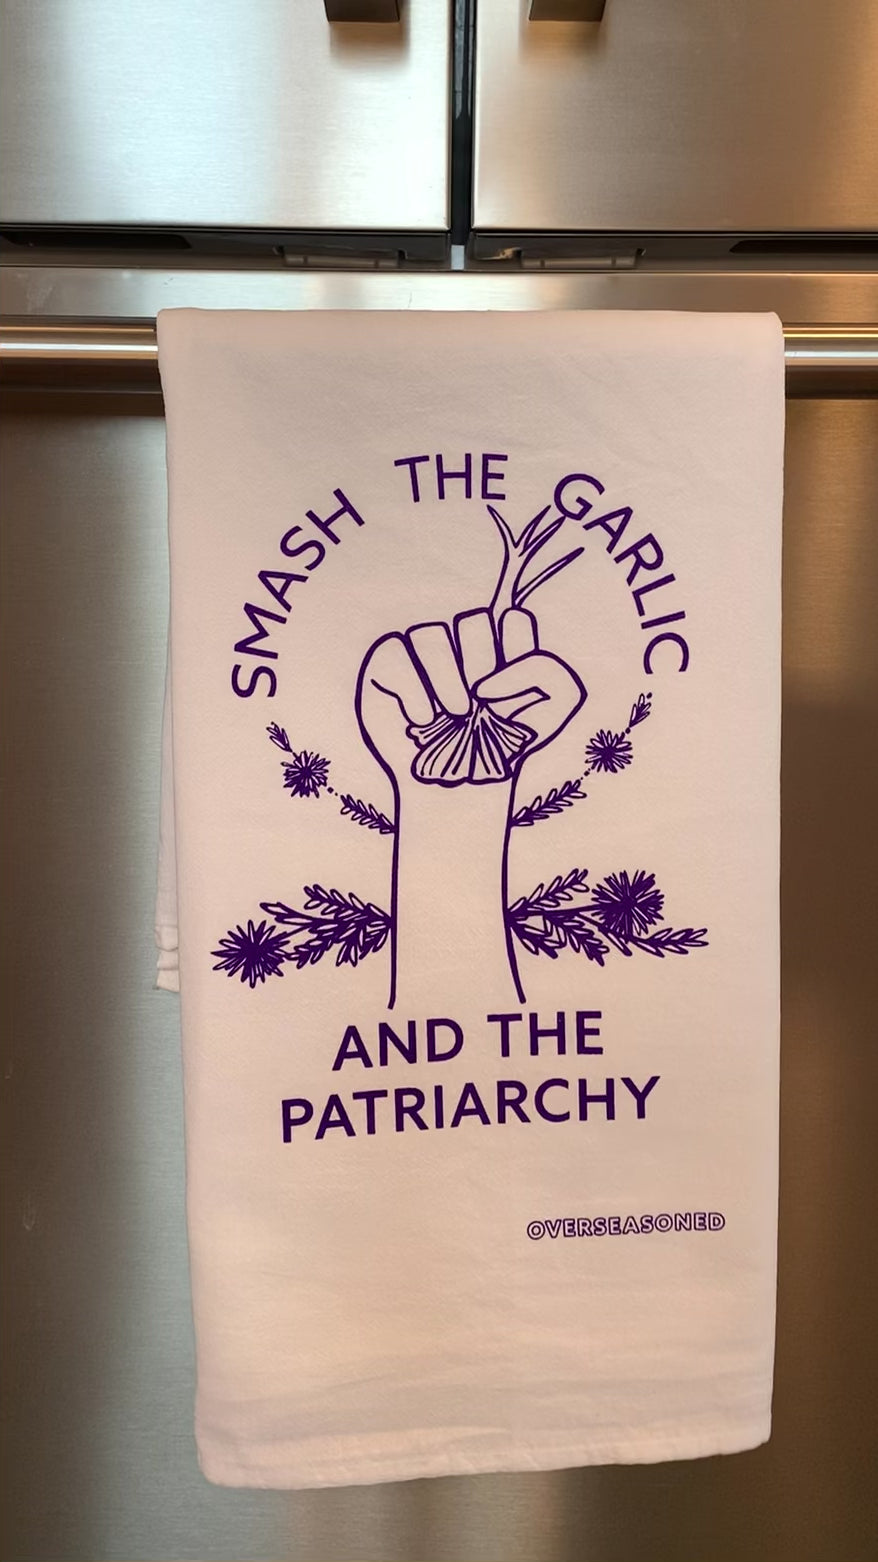 A white tea towel with purple lettering that reads "Smash the Garlic and the Patriarchy" and a garlic design hangs in a kitchen